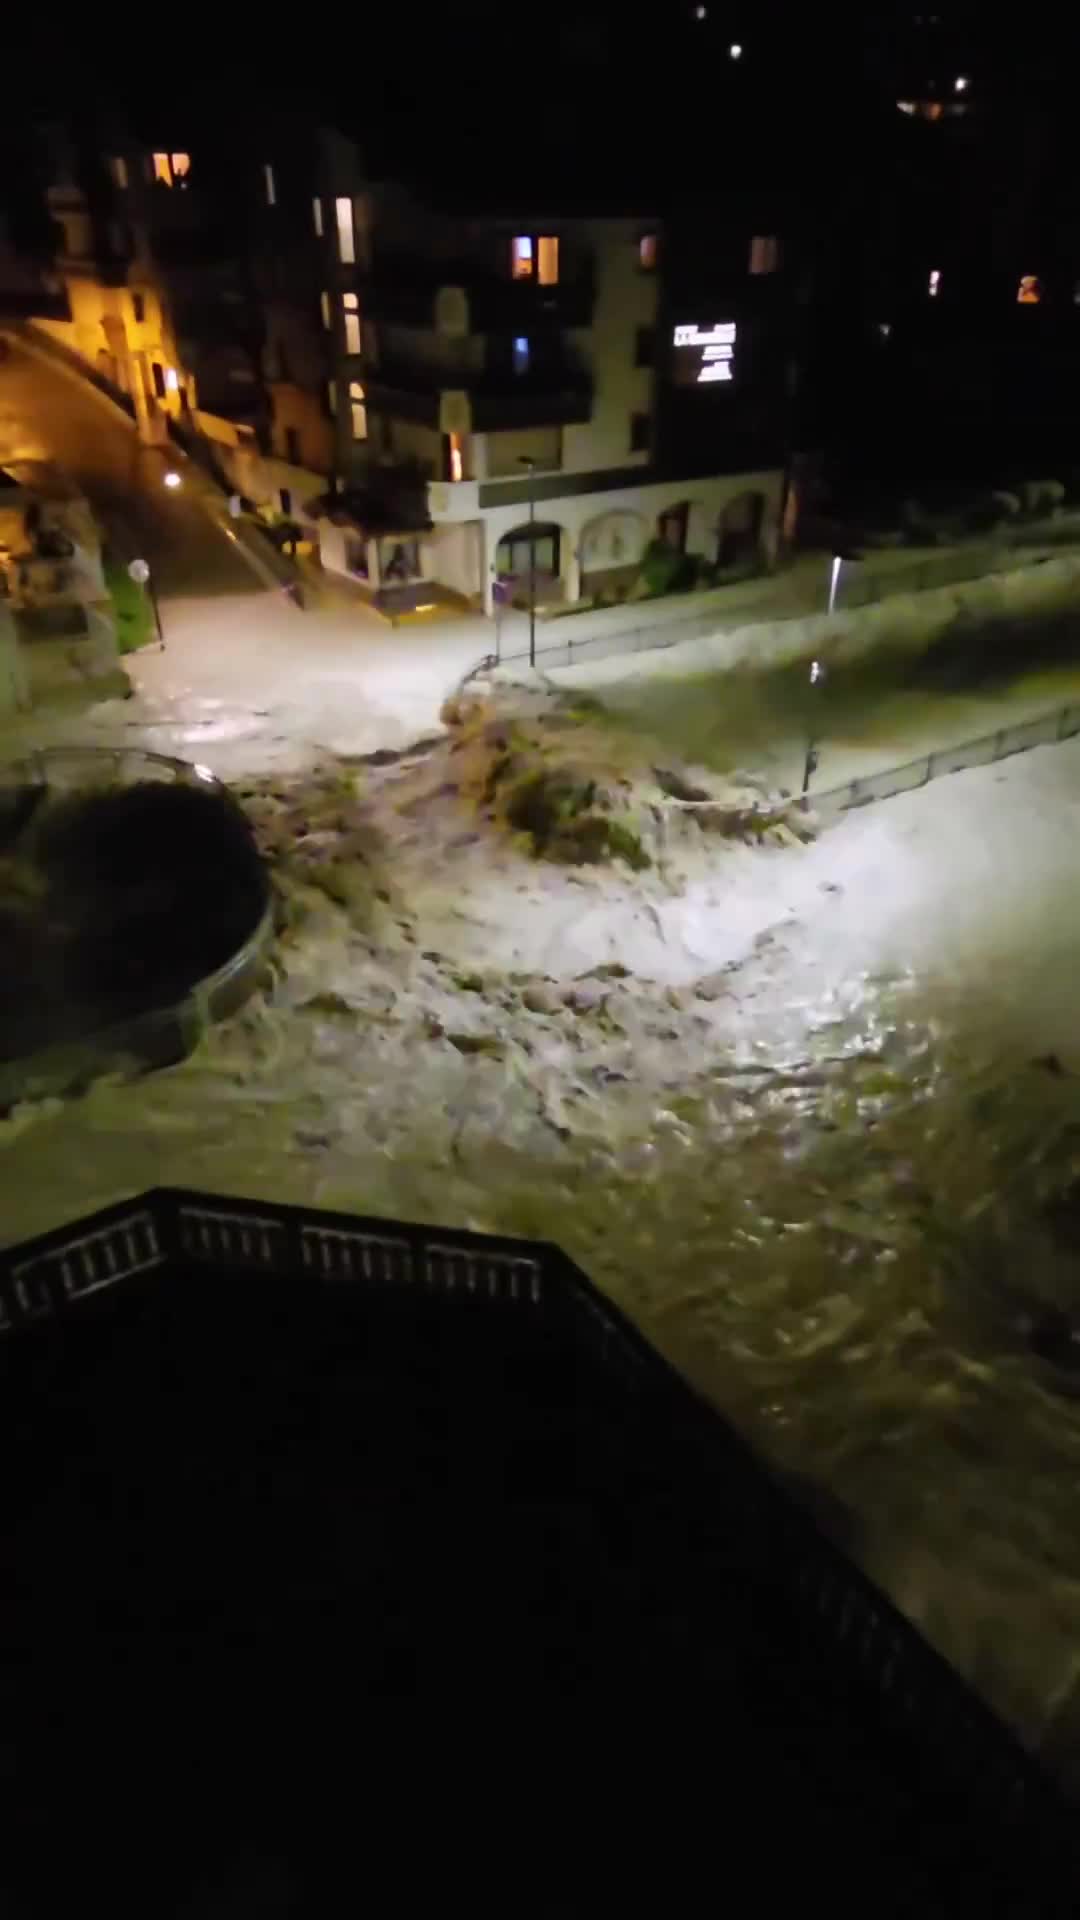 New disaster in Zermatt in Switzerland where torrential storms cause flooding last night, 8 days after the previous ones (© Manuel Jorge)